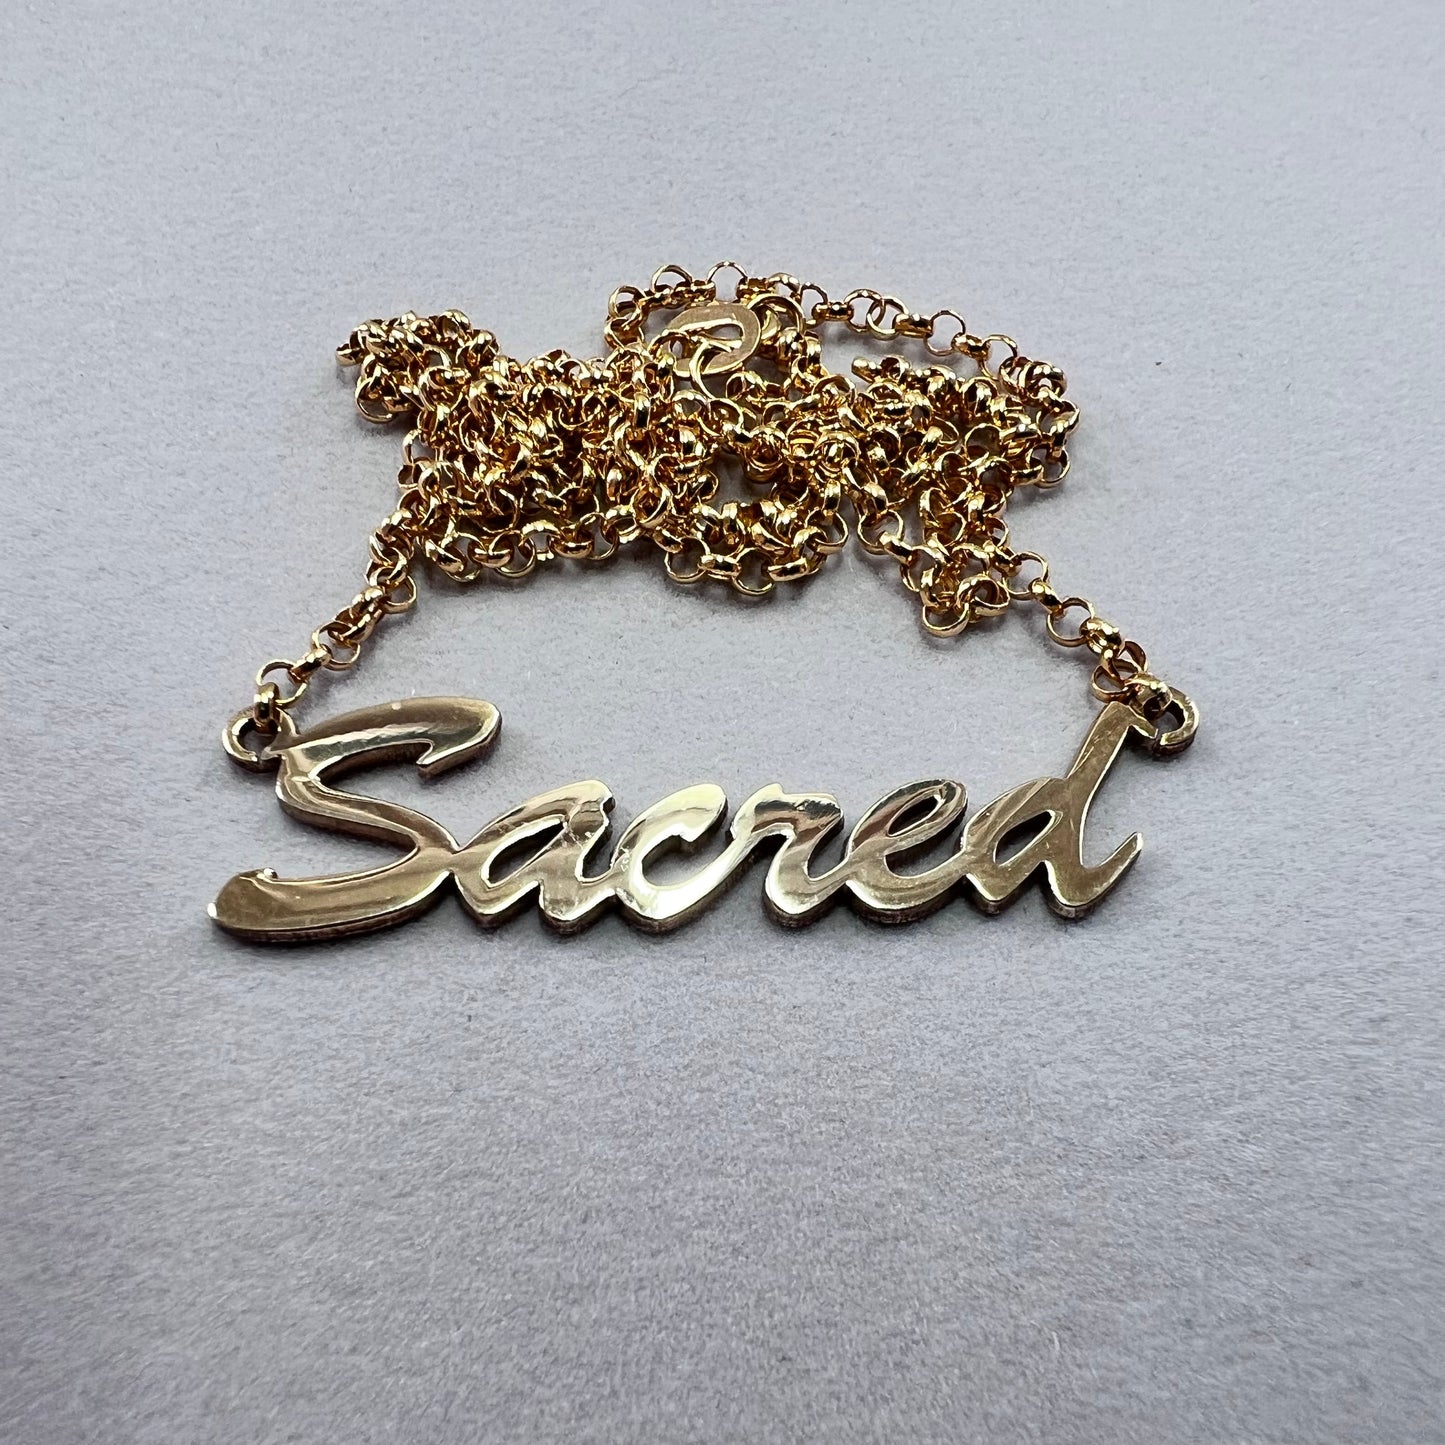 'sacred' solid 9ct gold necklace